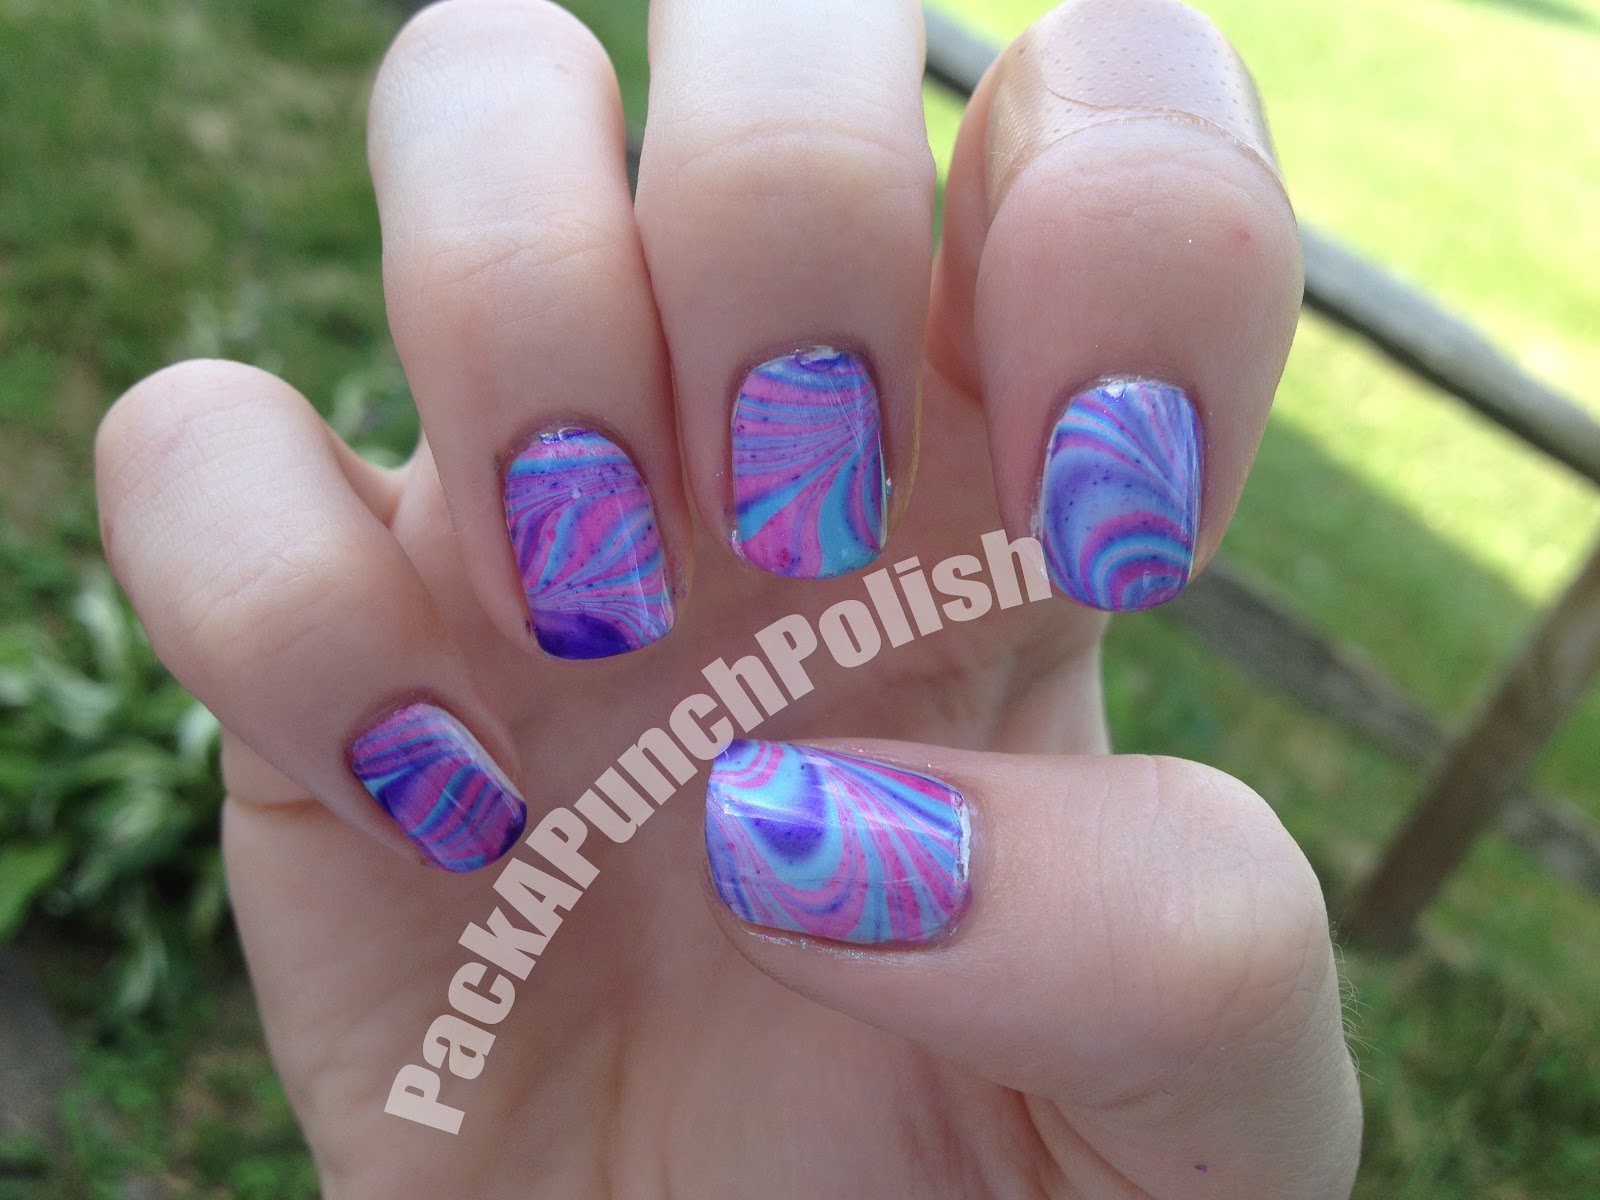 2. How to Create a Water Marble Nail Design - wide 6